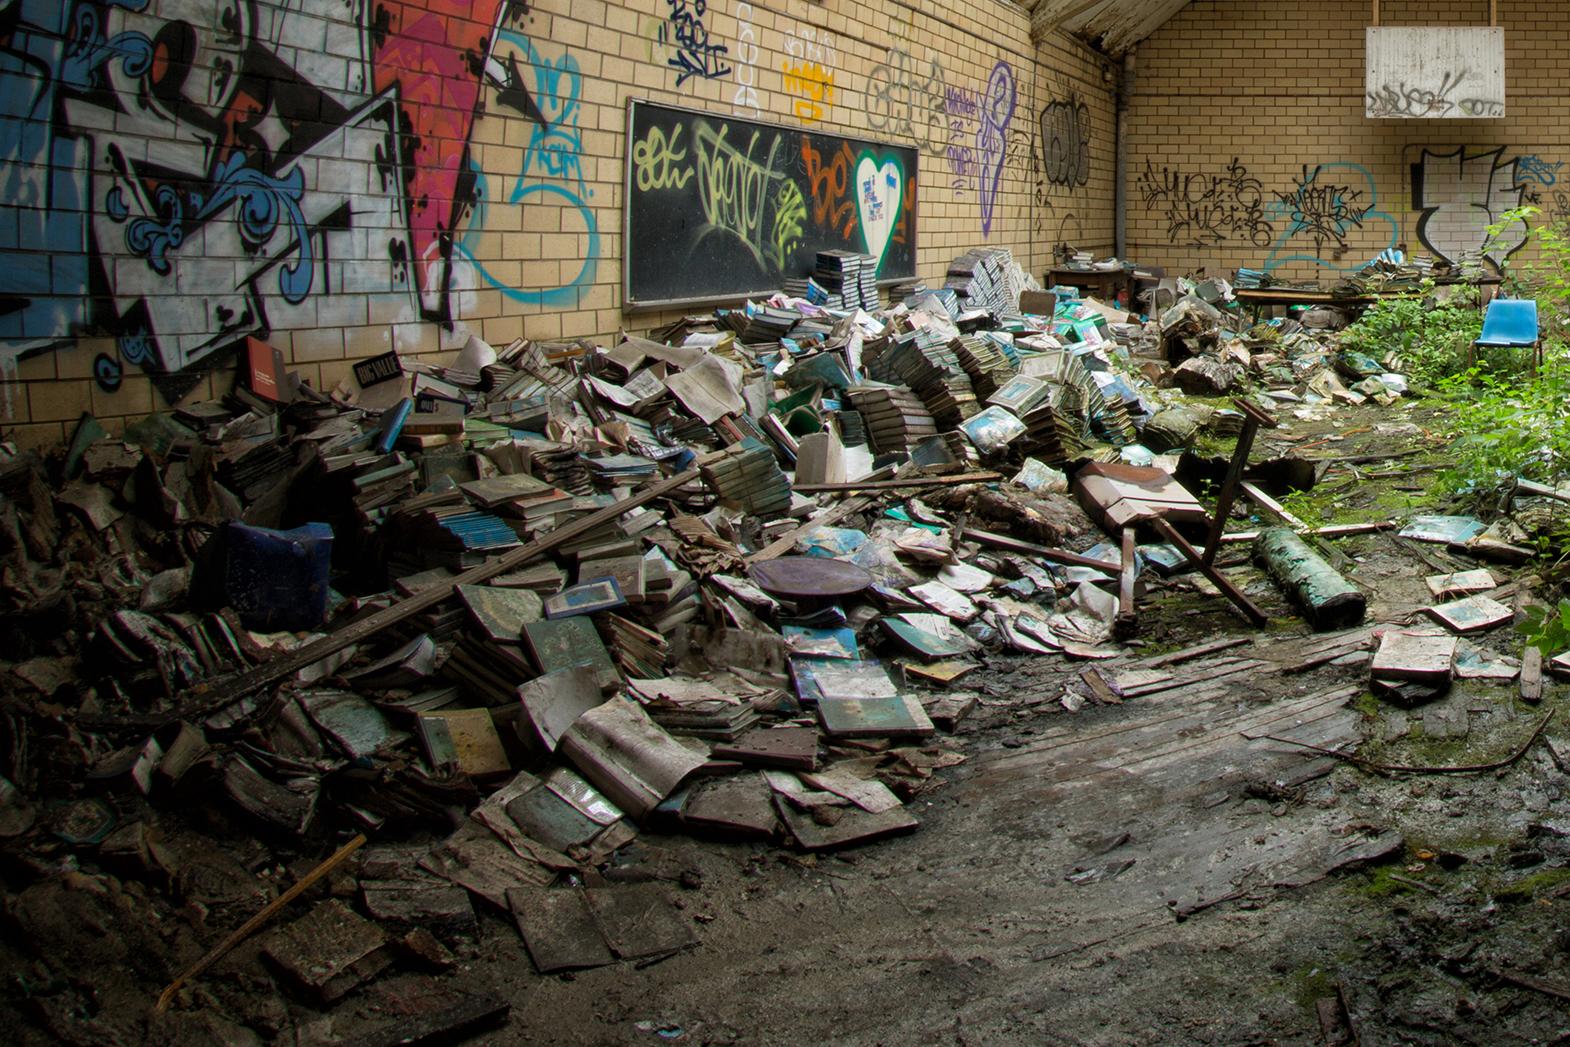 Rebecca Skinner’s “Book Beauty 6” is a 11 x 17 inch metal print of a gymnasium full of discarded books left to decay in a deserted school. The color photograph with hues of green and blue is an example of how quickly nature reclaims the abandoned.